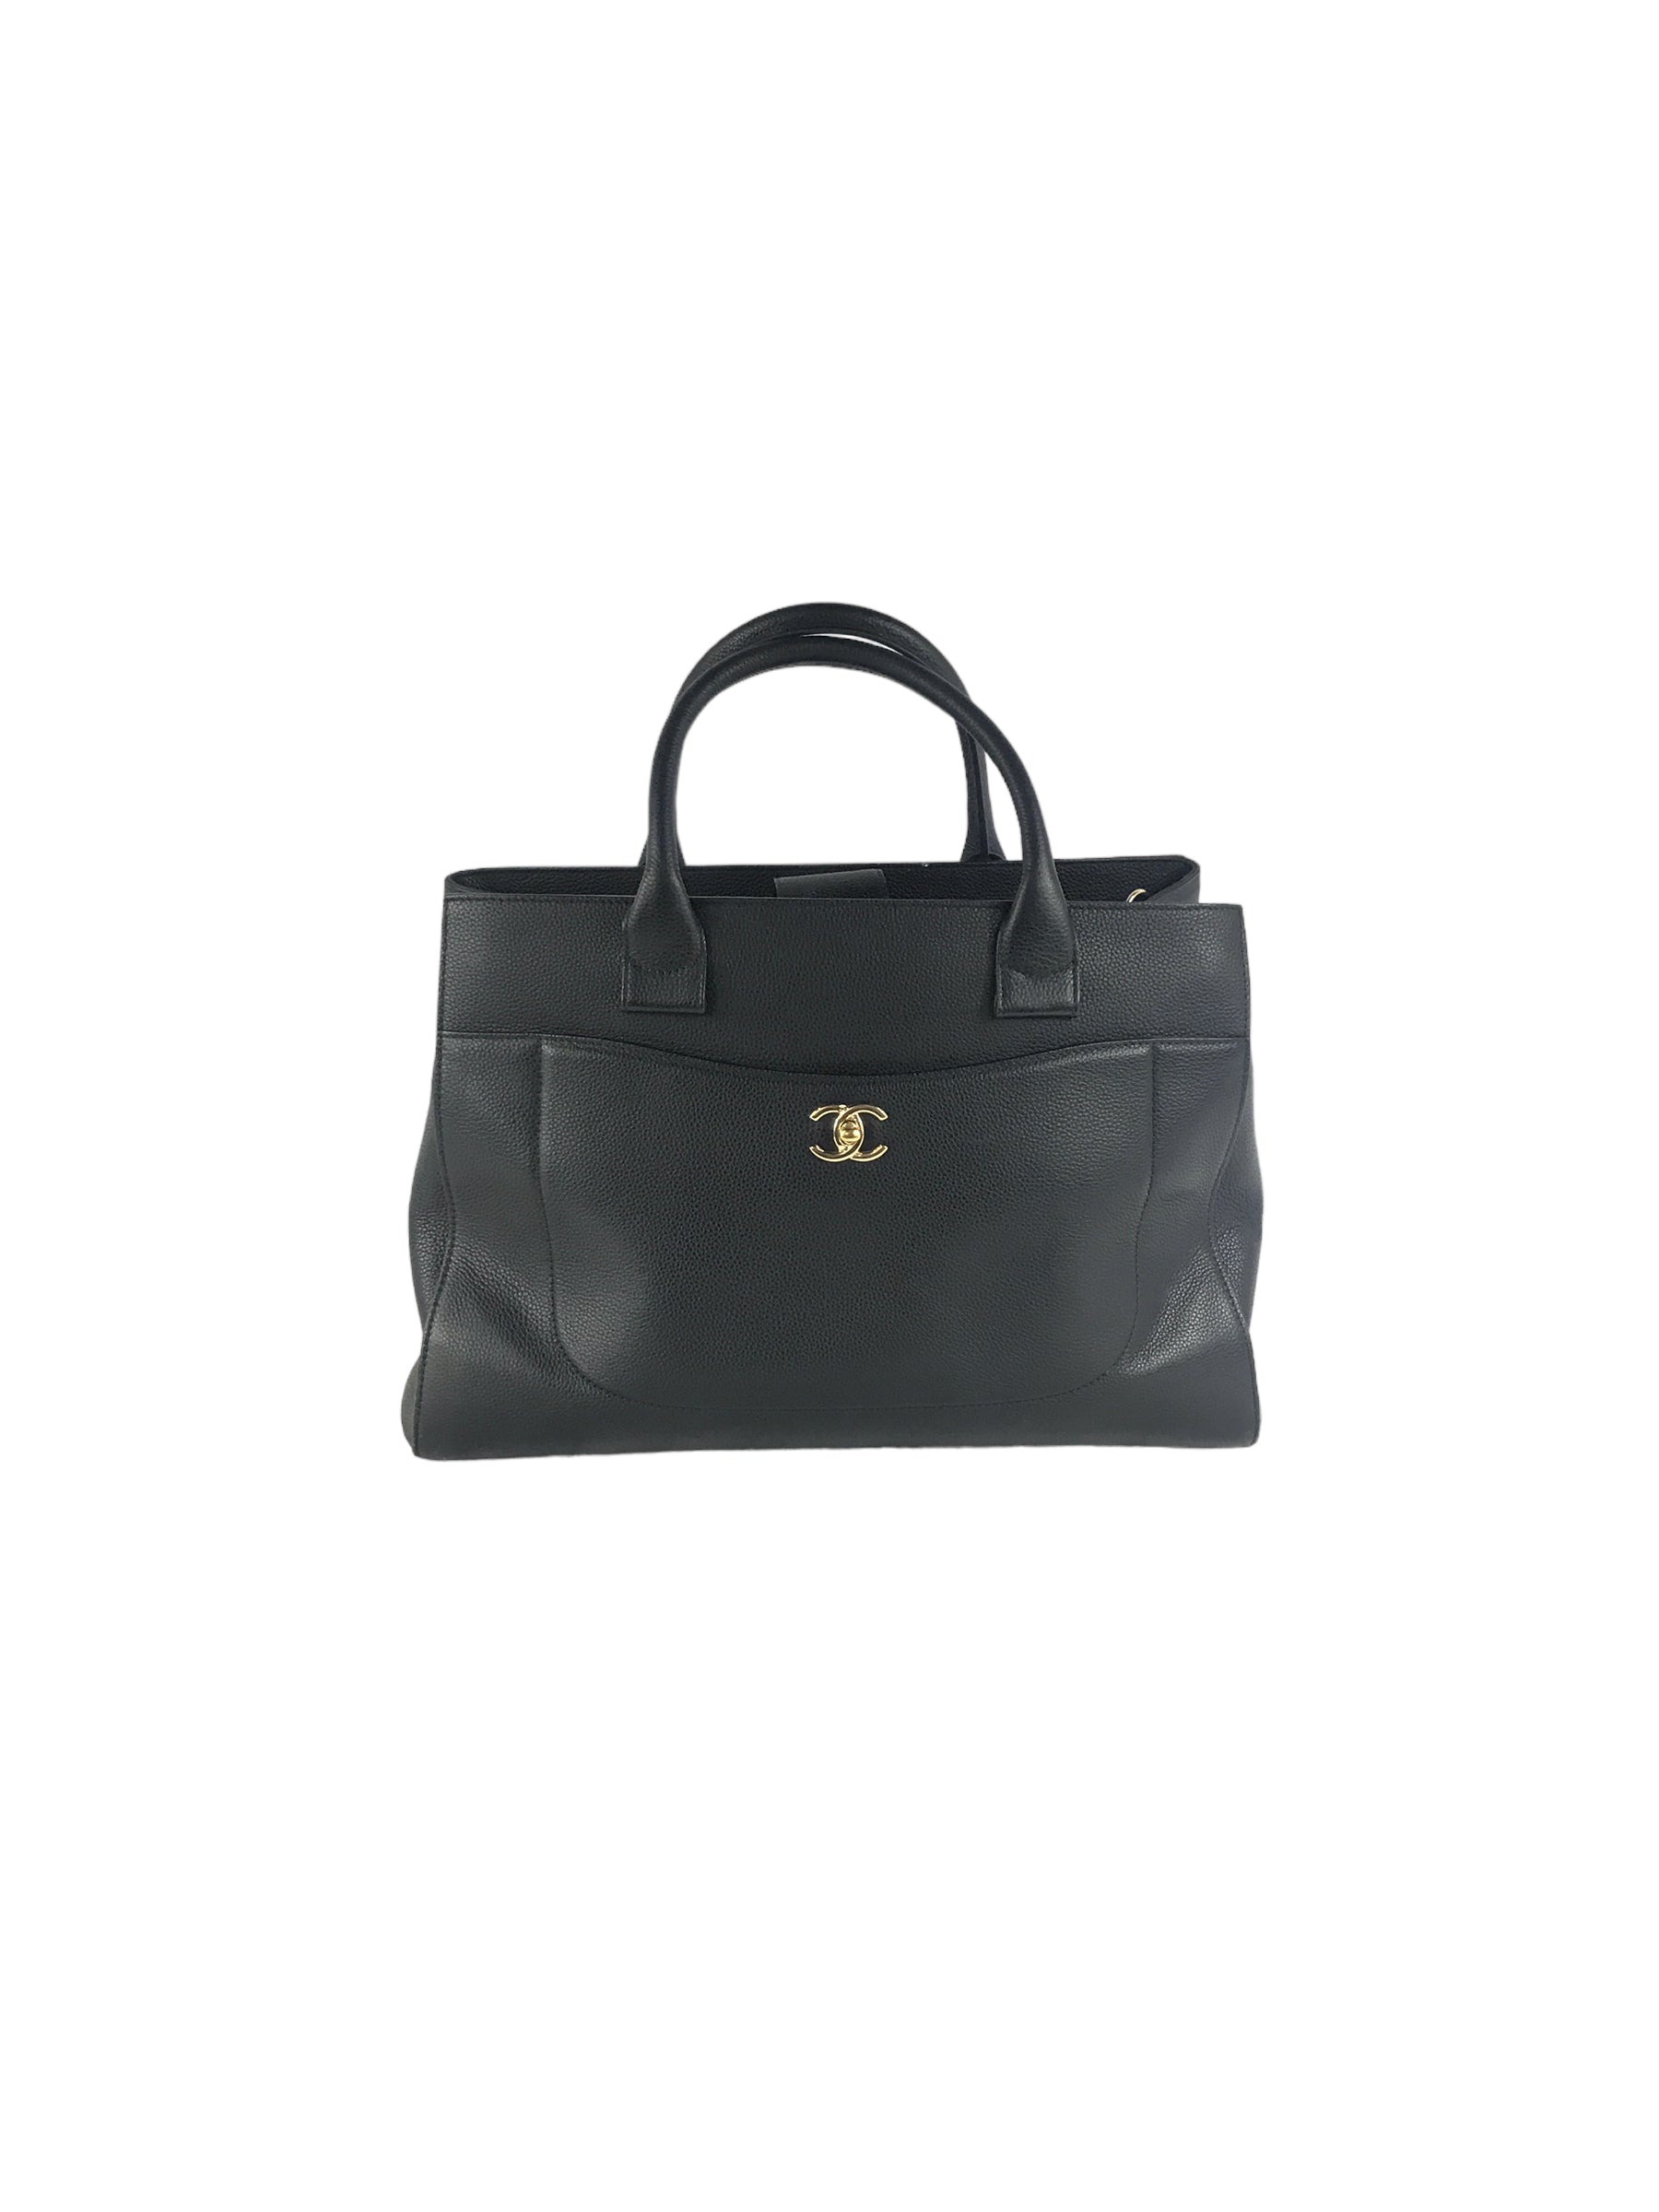 Chanel Black Deerskin Leather Large Cerf Executive Tote Chanel